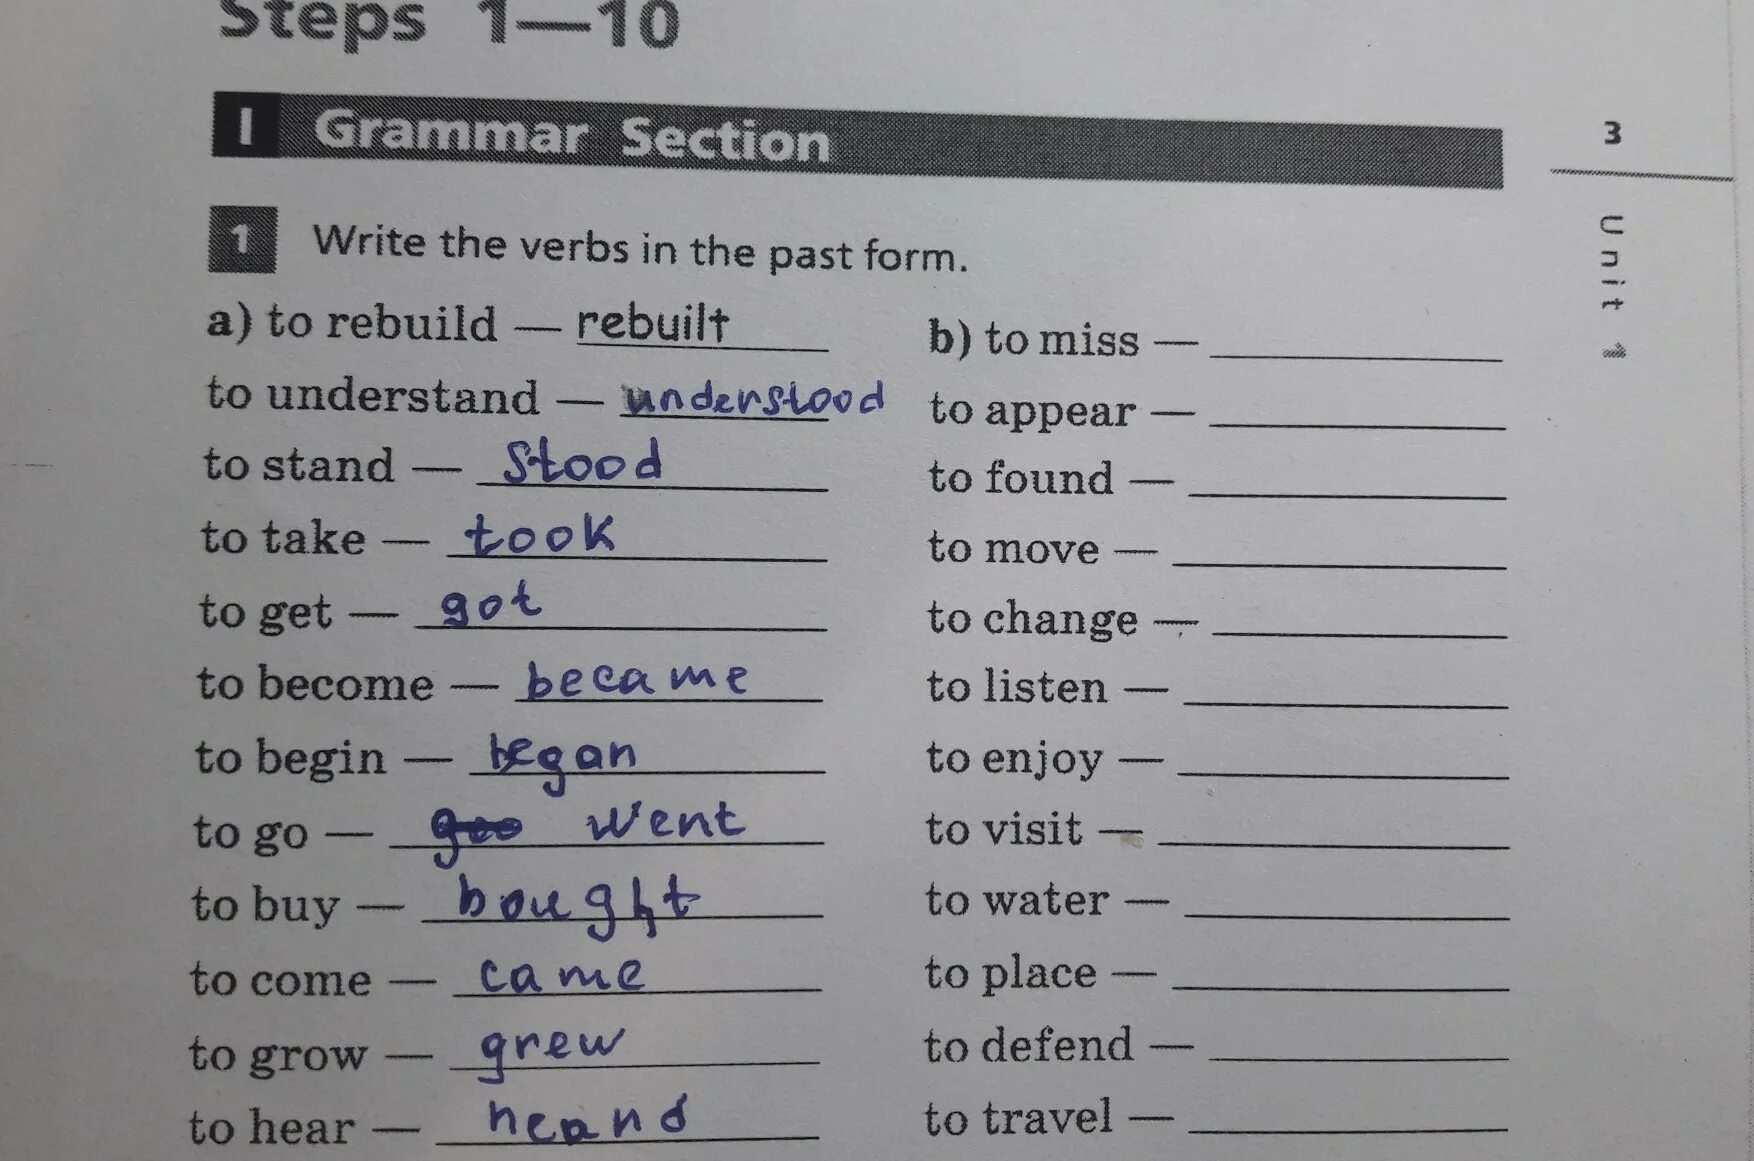 Unit 2 section 2. Write the verbs in the past forms 6 класс. Write the verbs in the past forms 5 класс ответы. Verbs in past. Write the verbs in the past forms 6 класс лексико грамматический.